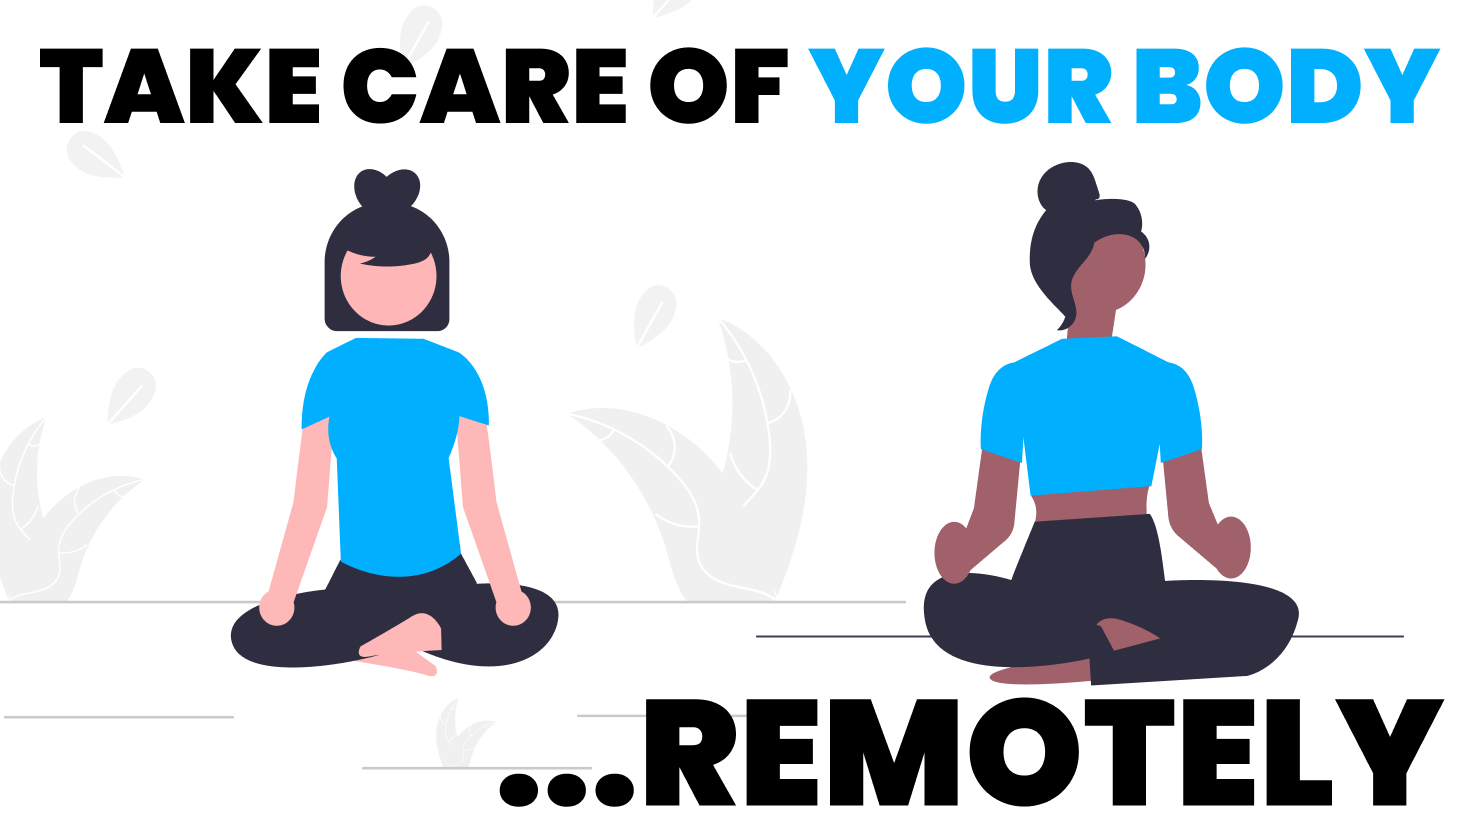 How to take care of your body as a remote worker?